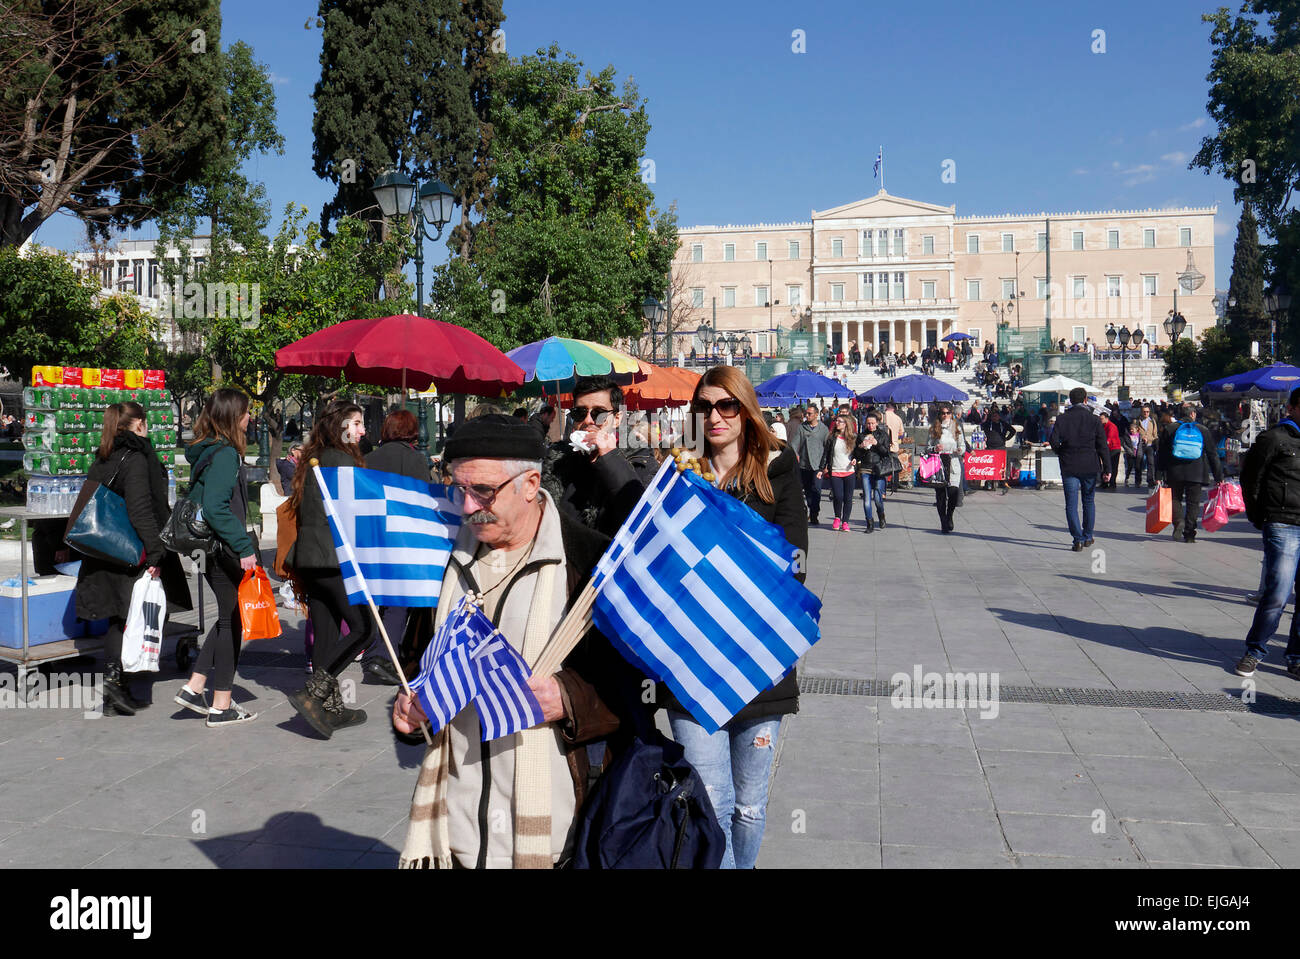 greece athens sitagma square a man selling greek flags Stock Photo